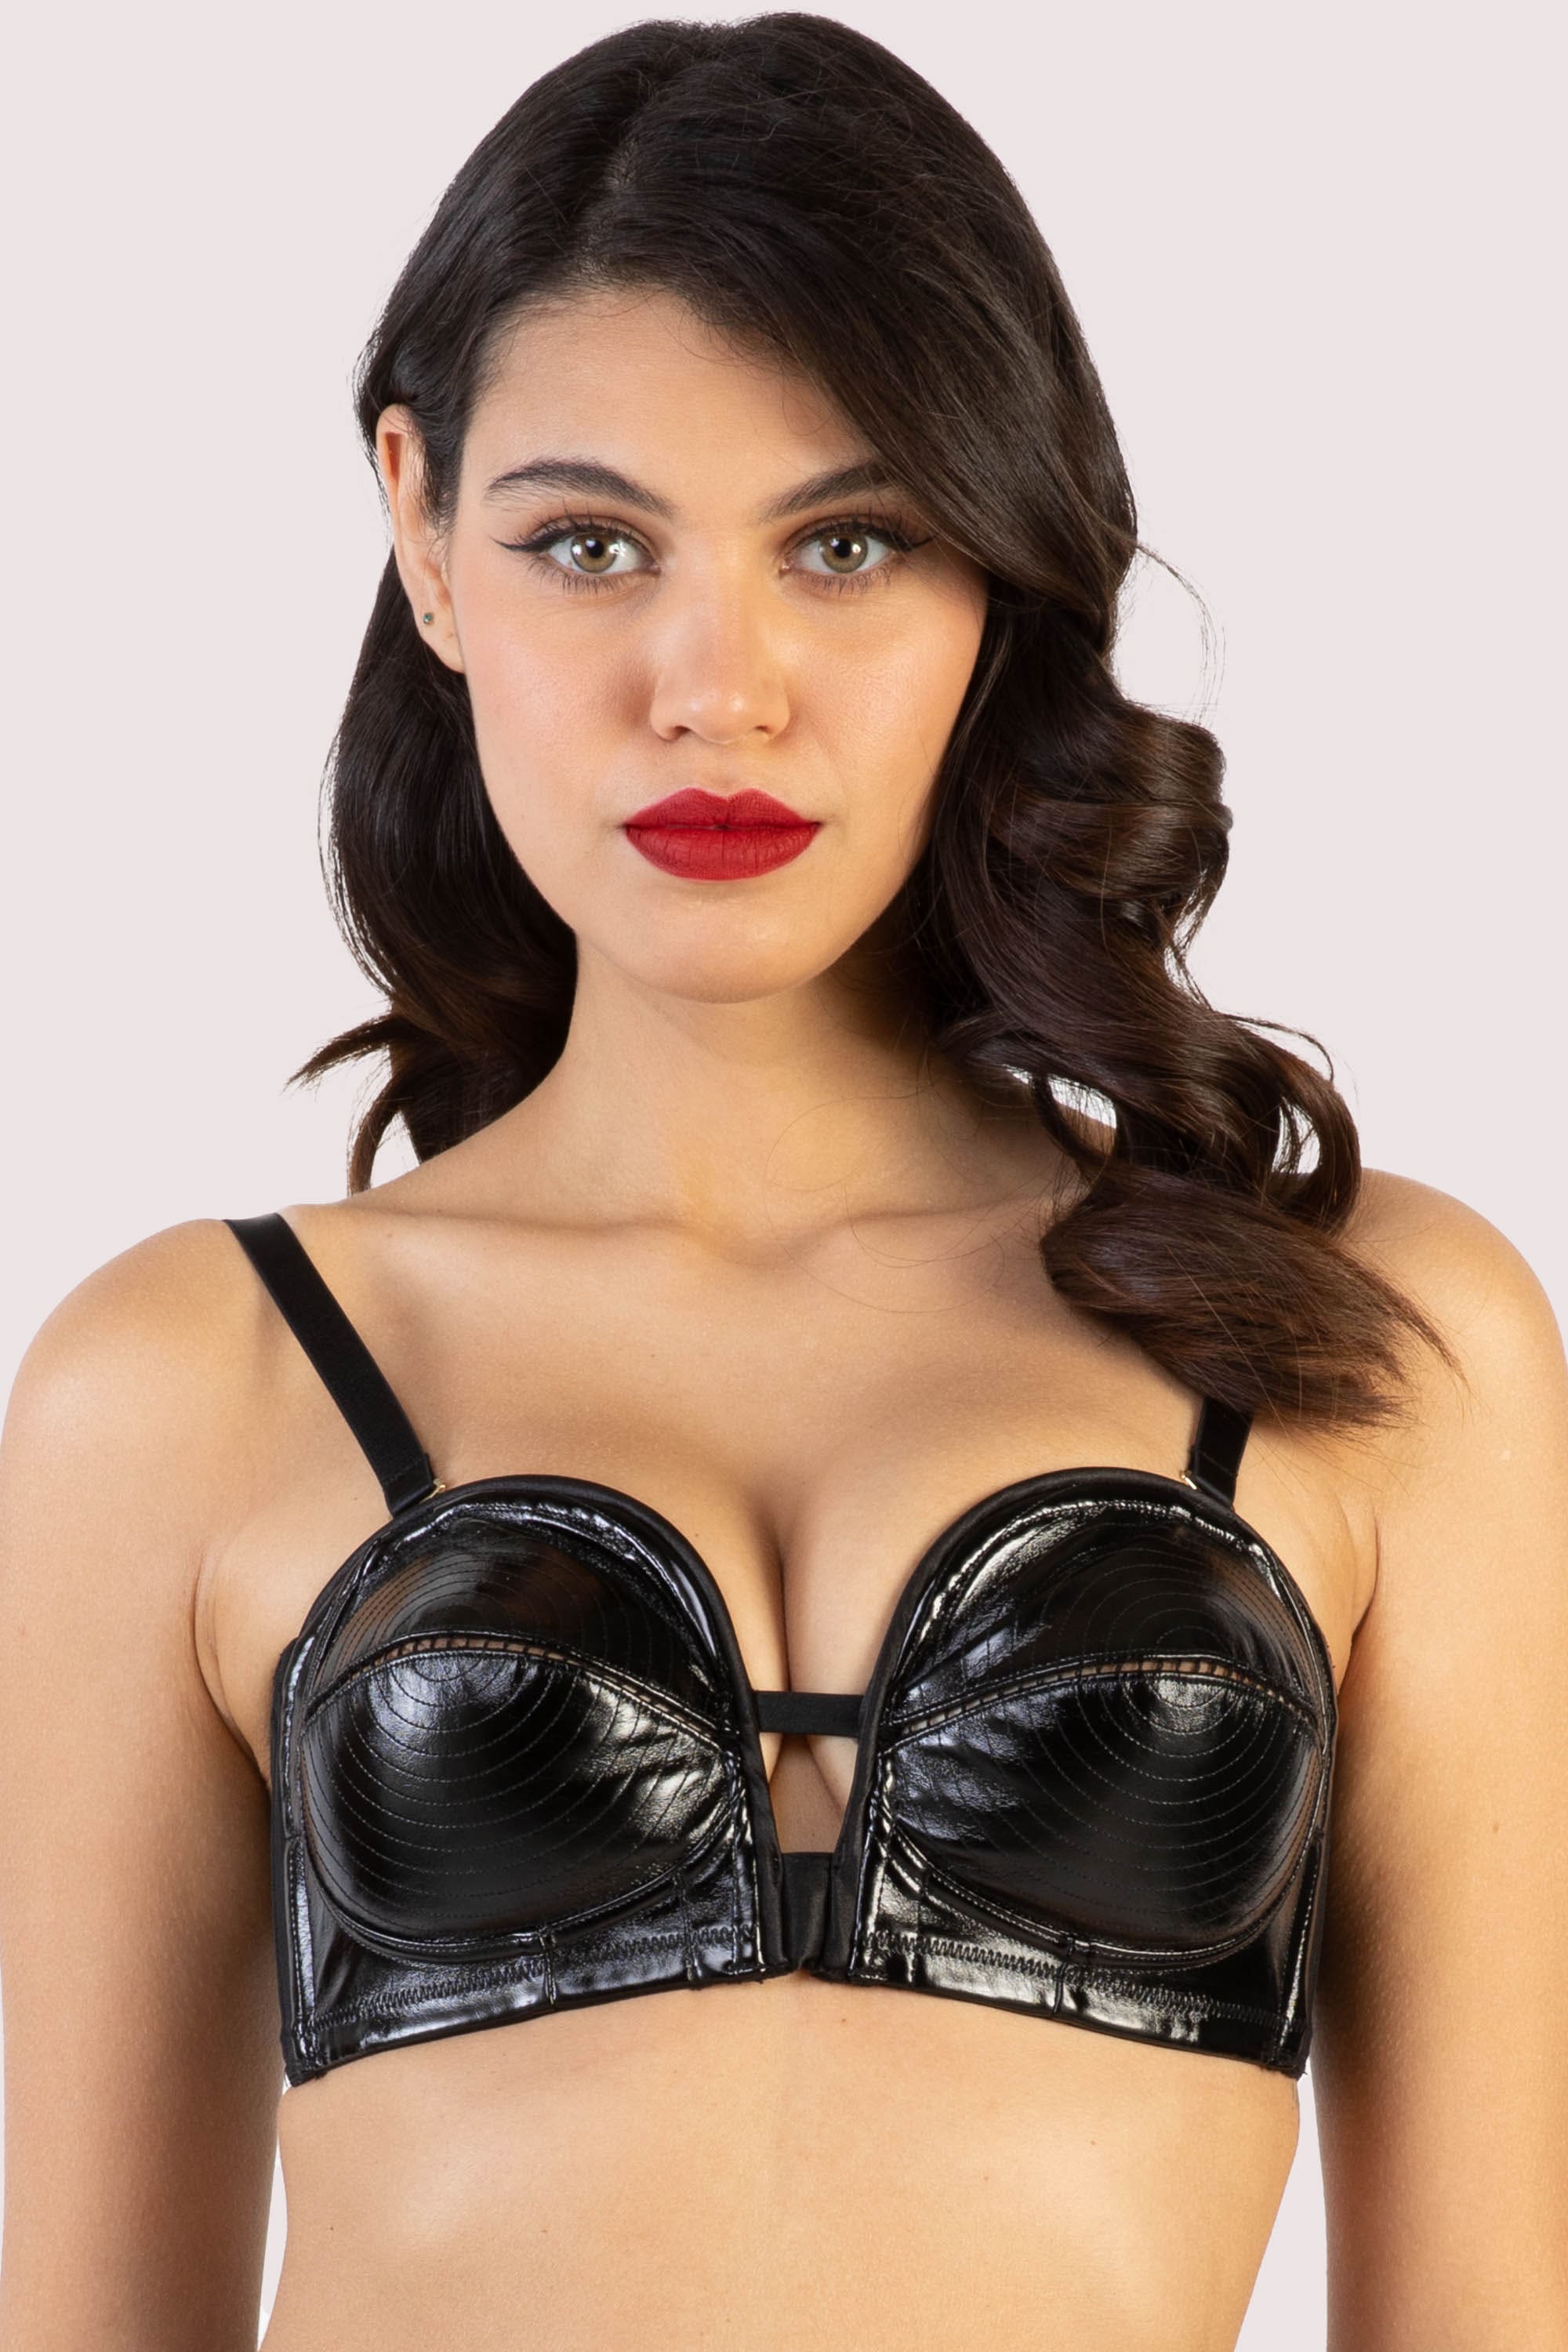 Buy Vintage Push up Bra From Japan size 12A Aus & 34A UK/US, Japan